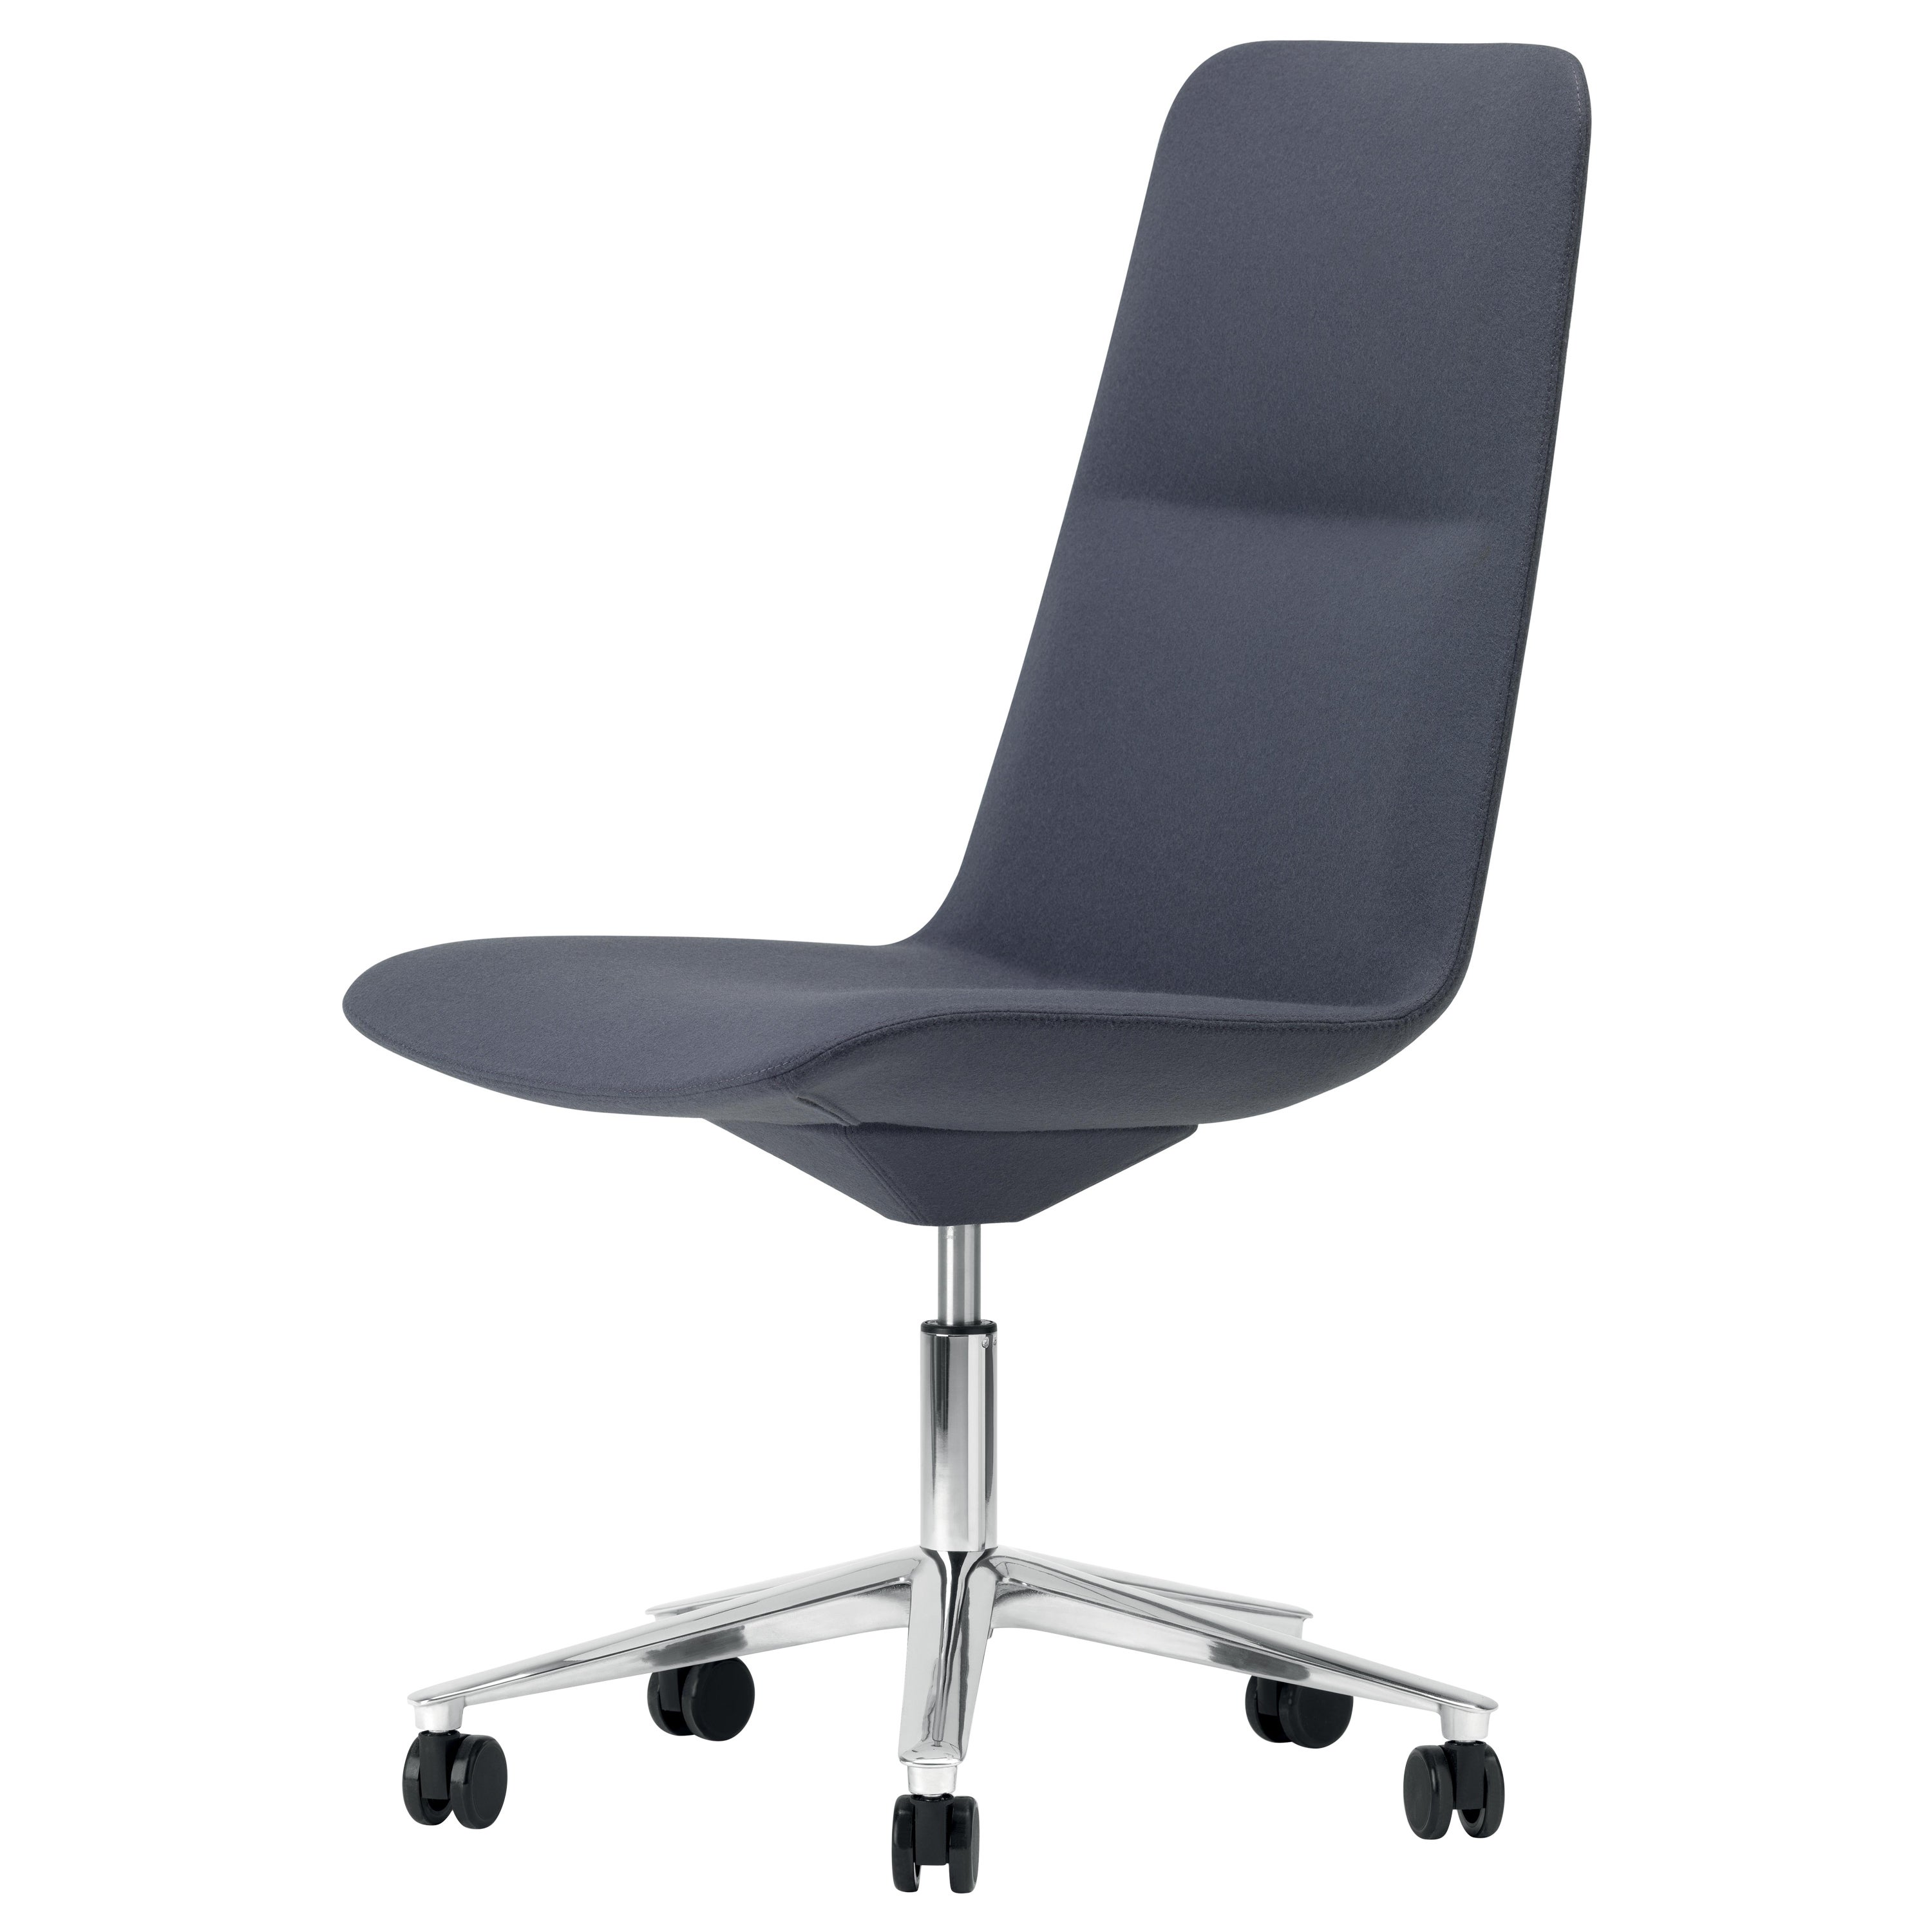 Alias 825 Slim Conference High 5 Chair with Upholstered Seat and Chromed Frame